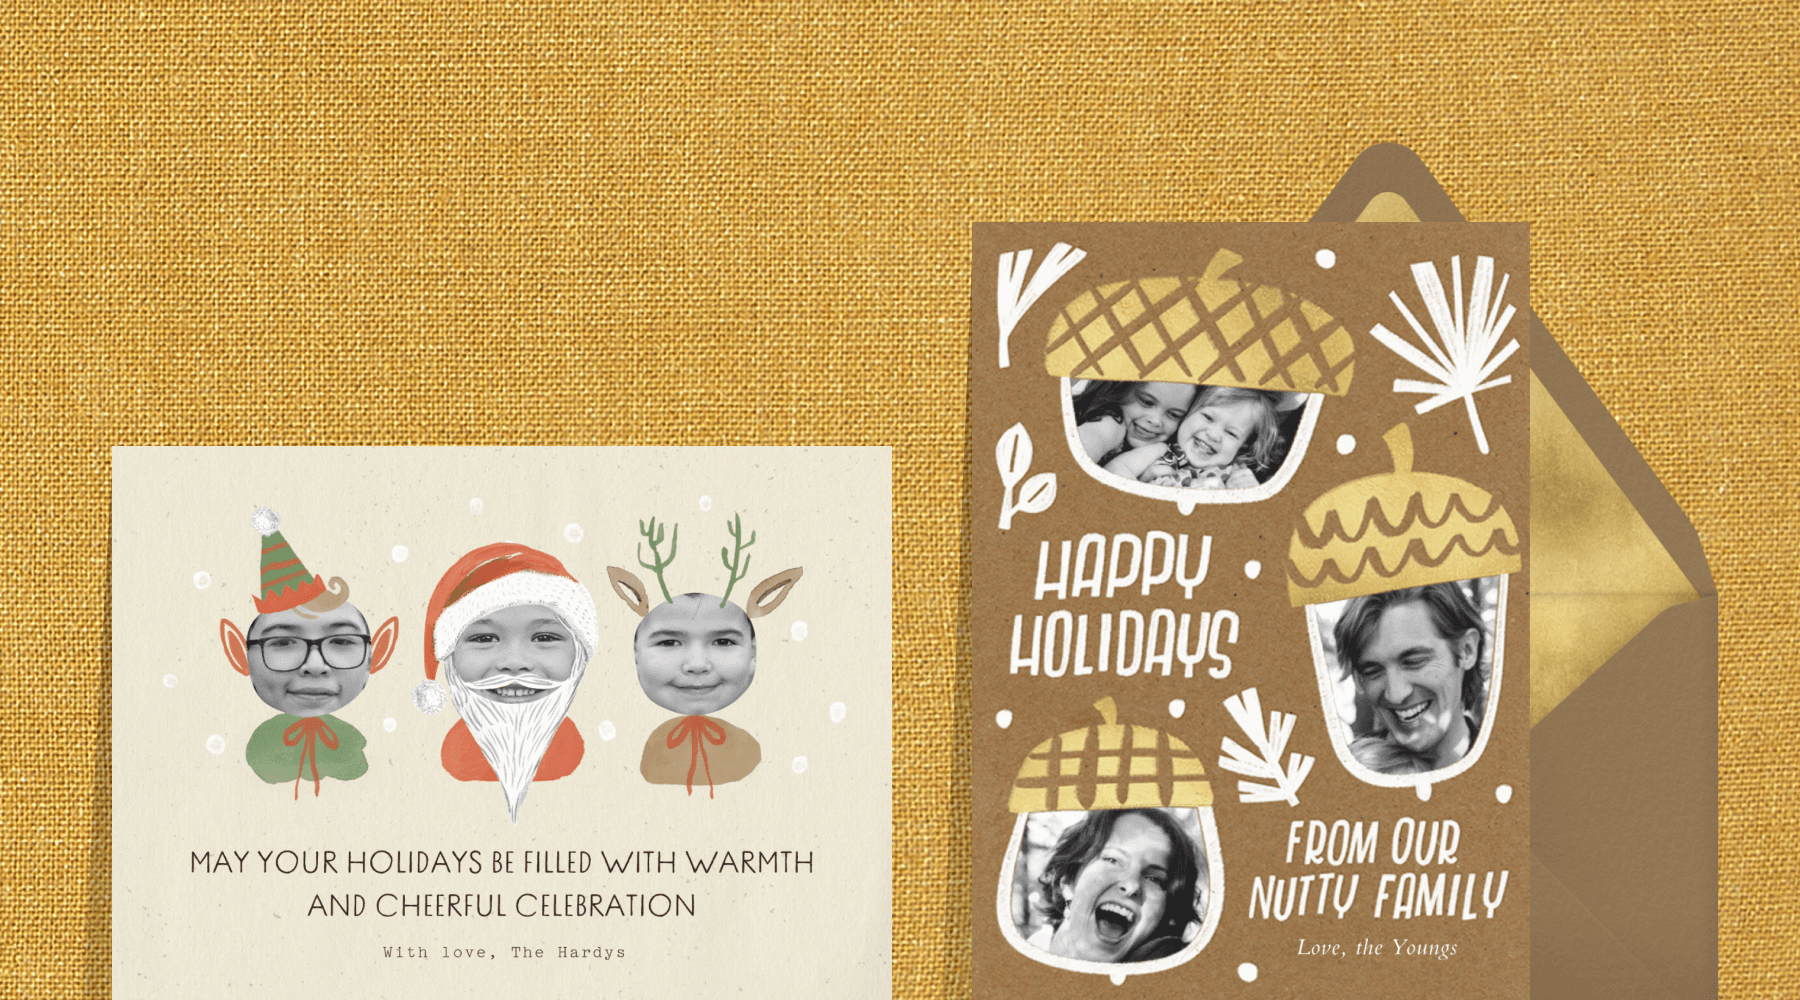 Two holiday photo cards - left: illustration of an elf, Santa and reindeer with photos as the faces, right: illustration of three acorns with photos in the middle.